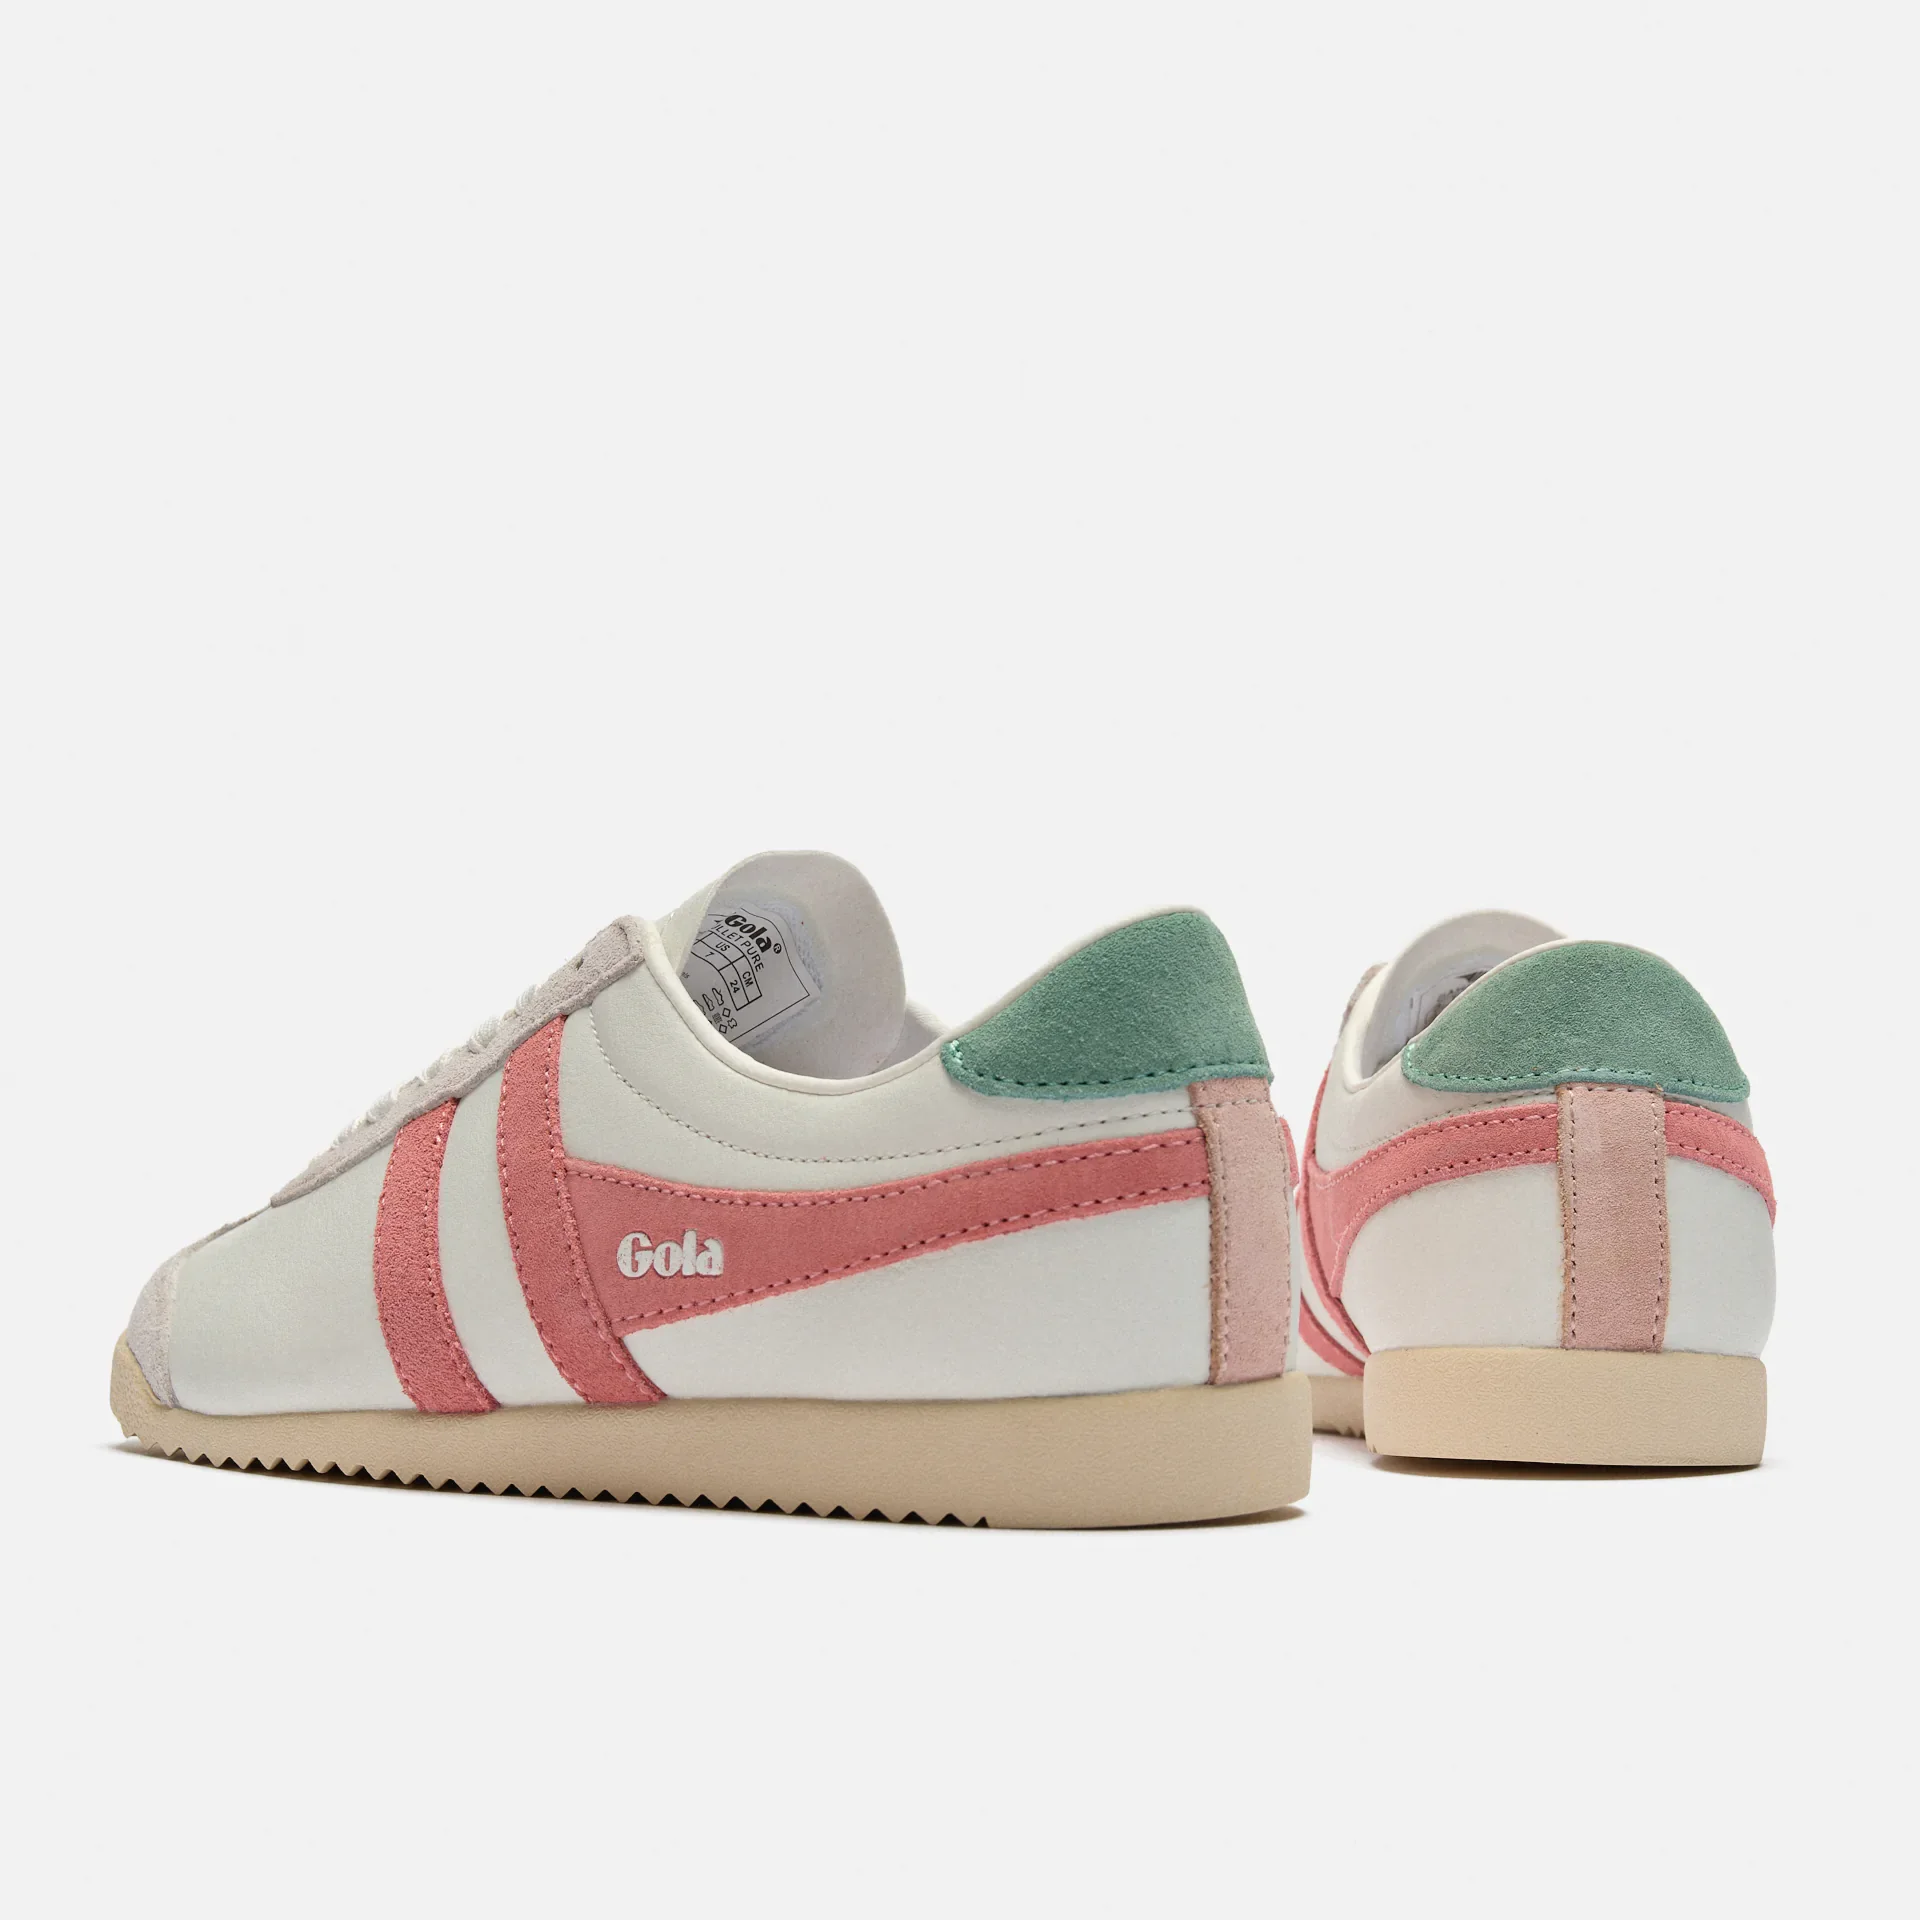 Gola Bullet Pure Sneaker White/Coral Pink/Green Mist